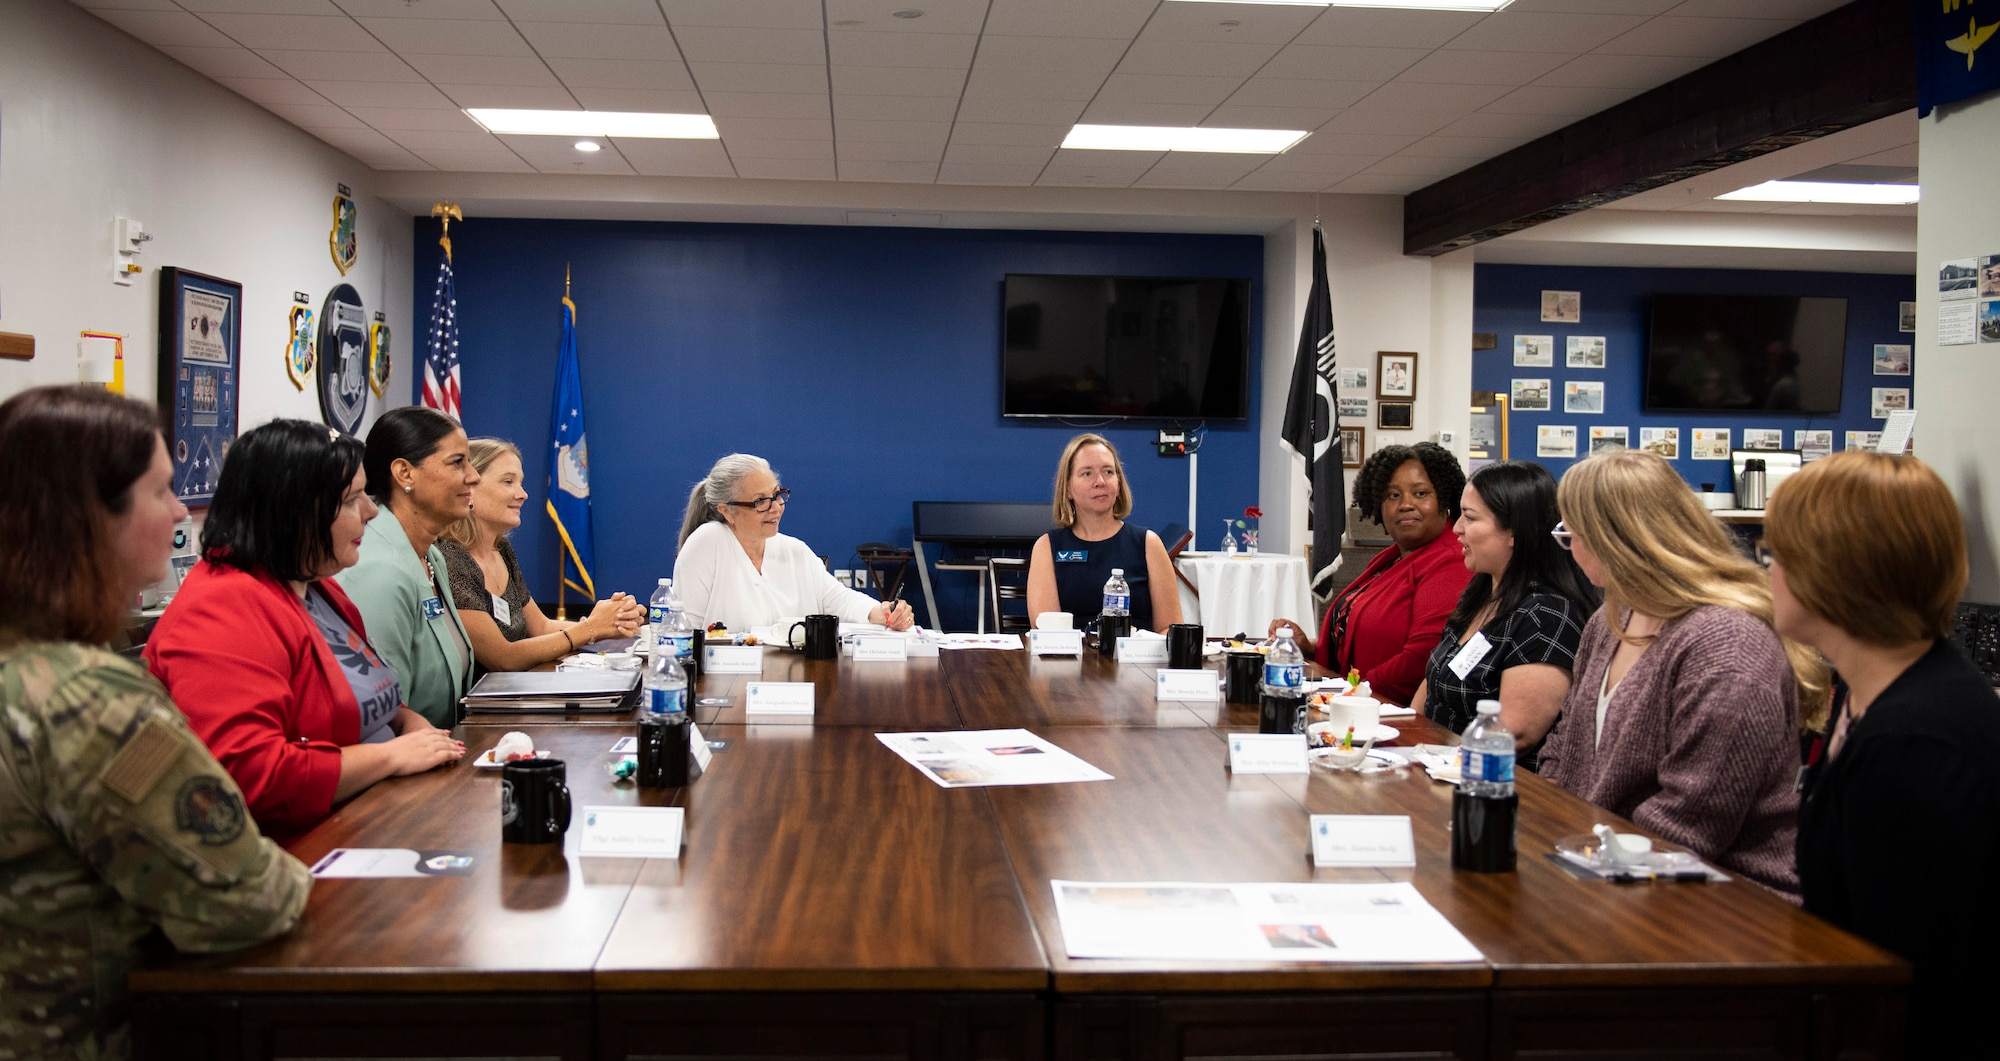 Mrs. Christine Grady (center, in white), wife of Admiral Christopher W. Grady, Vice Chairman of the Joint Chiefs of Staff, listens and takes notes as a family member from the Air Force Technical Applications Center shares her experiences of being a military spouse.  Mrs. Grady accompanied her husband to the nuclear treaty monitoring center, headquartered at Patrick Space Force Base, Fla., June 9, 2023 to talk about topics such as health care, family balance, deployments and separations, childcare, and spouse networking. (U.S. Air Force photo by Matthew S. Jurgens)